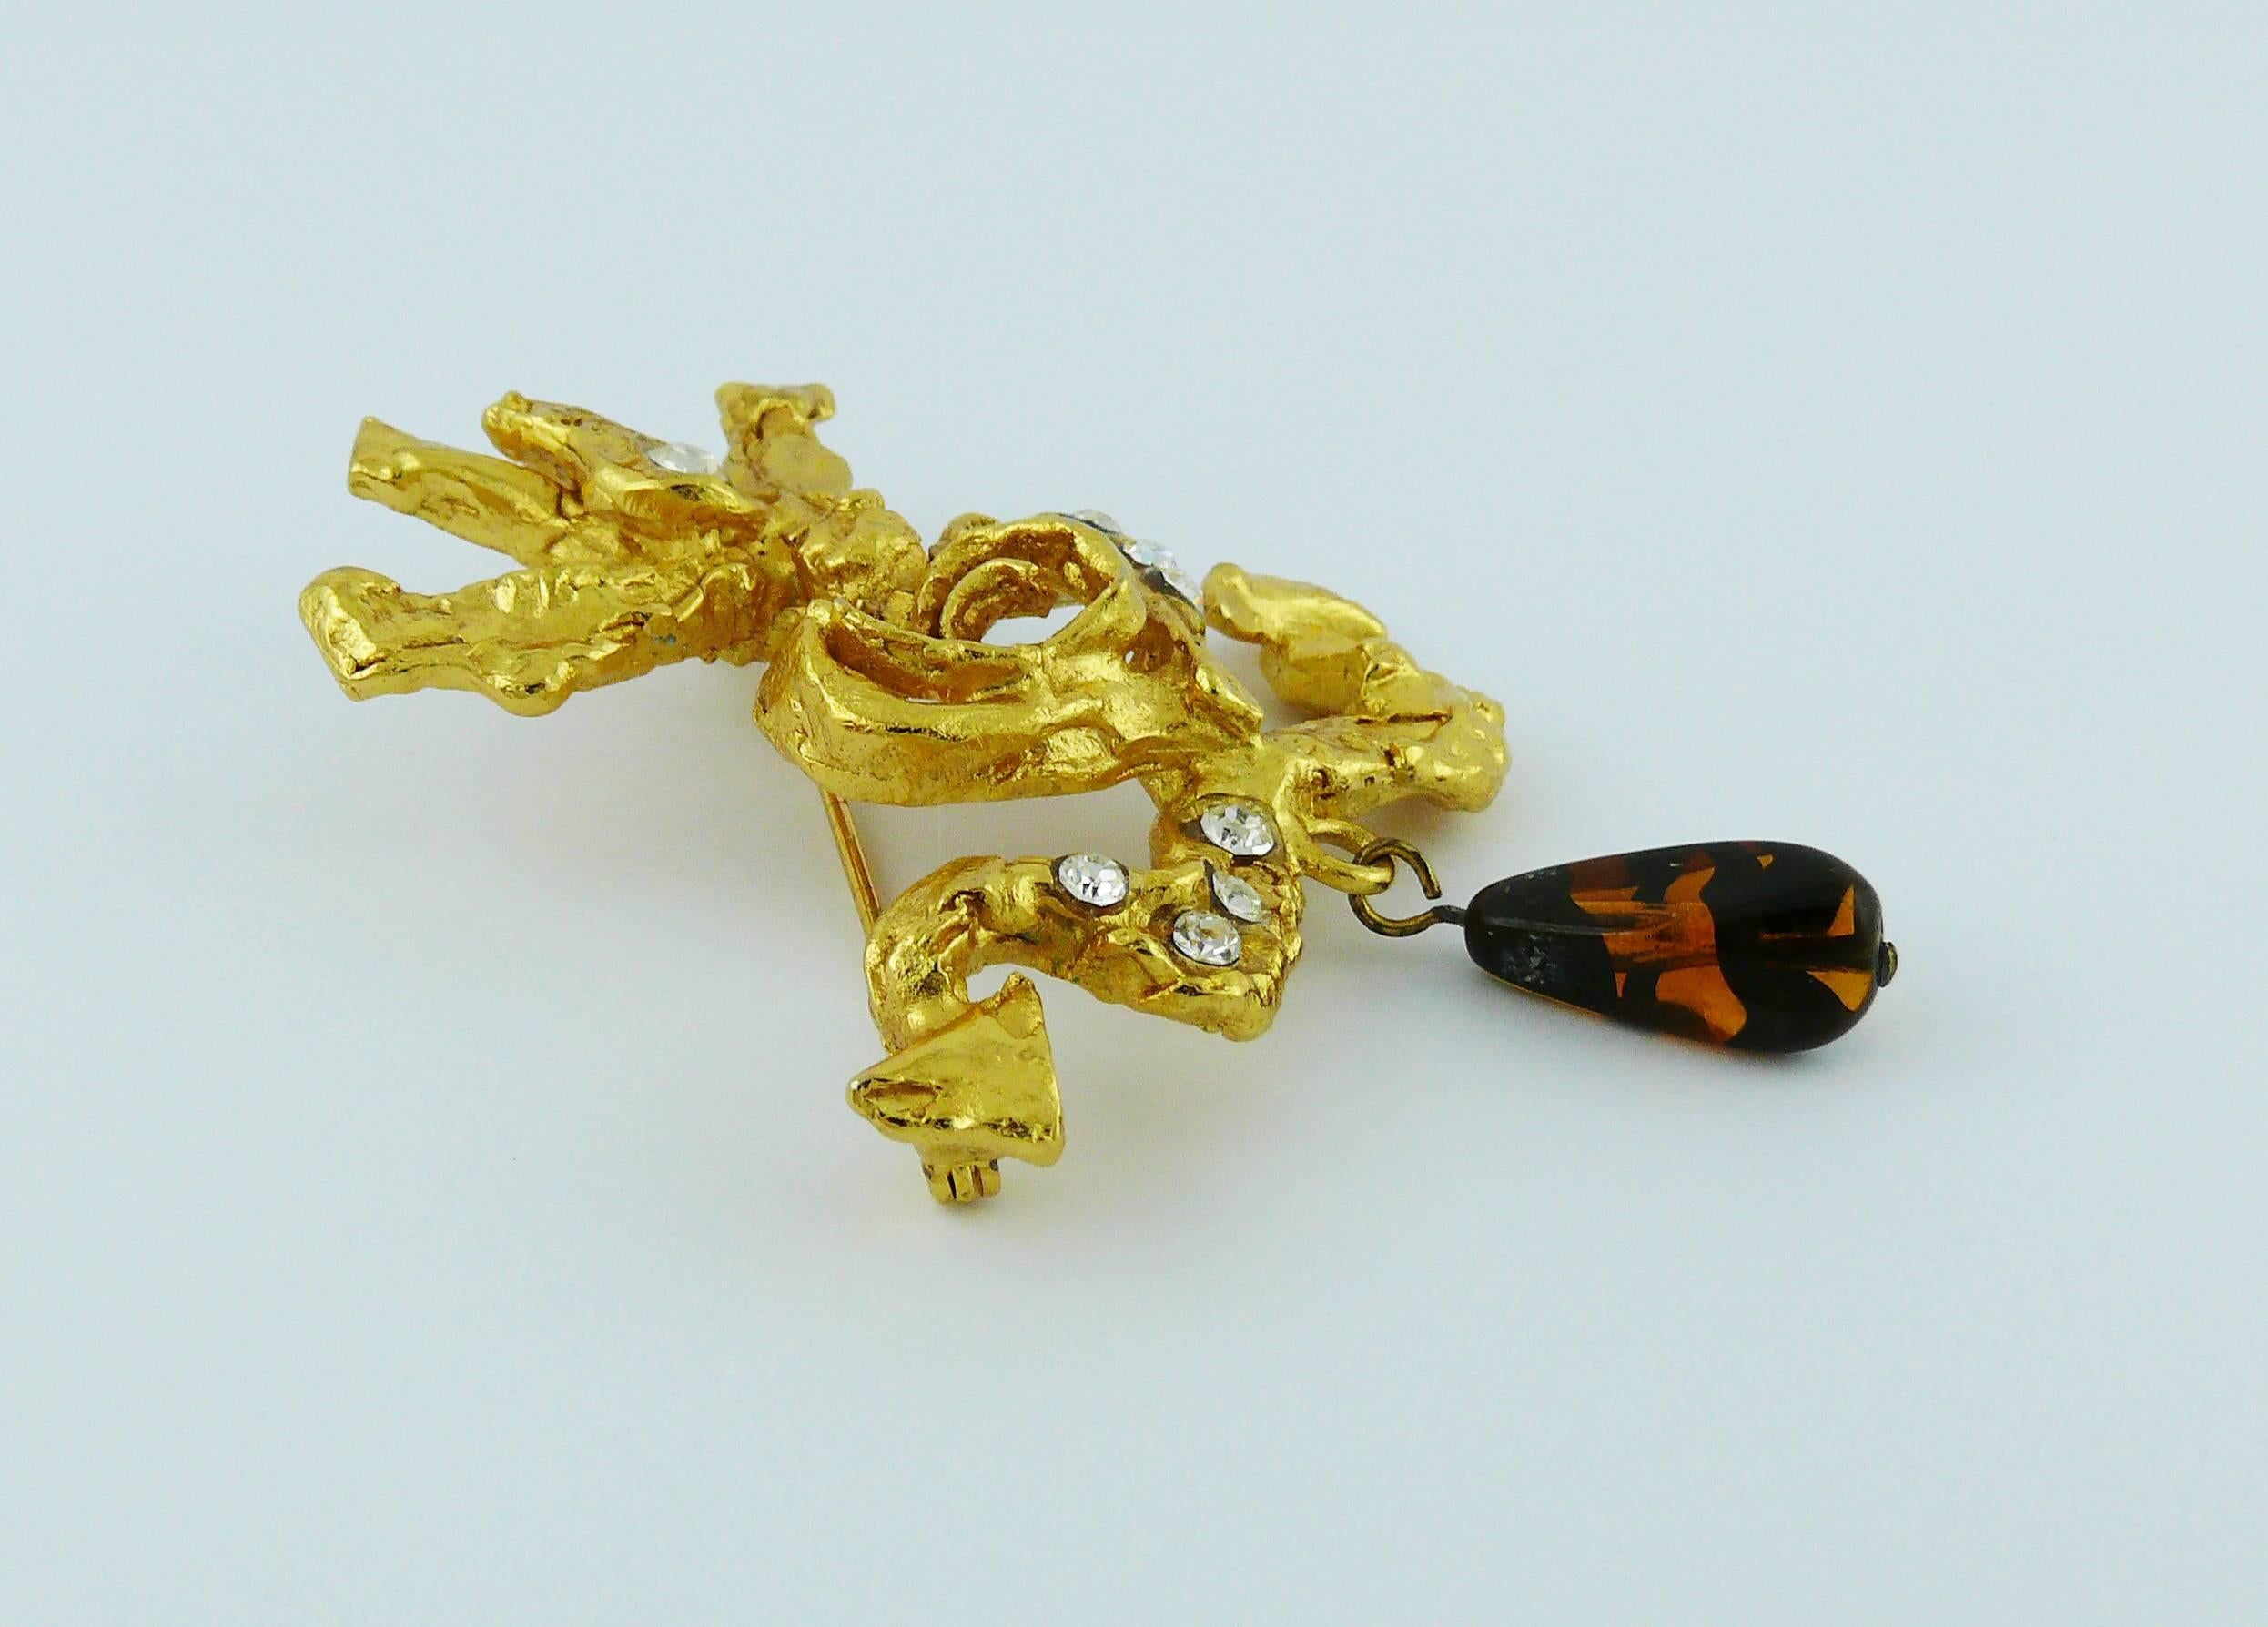 CHRISTIAN LACROIX vintage gold toned Camarguaise cross embellished with clear crystals and glass bead drop.

Marked CHRISTIAN LACROIX CL Made in France.

Indicative measurements : height approx. 6.8 cm (2.68 inches) / max. width approx. 4.9 cm (1.93